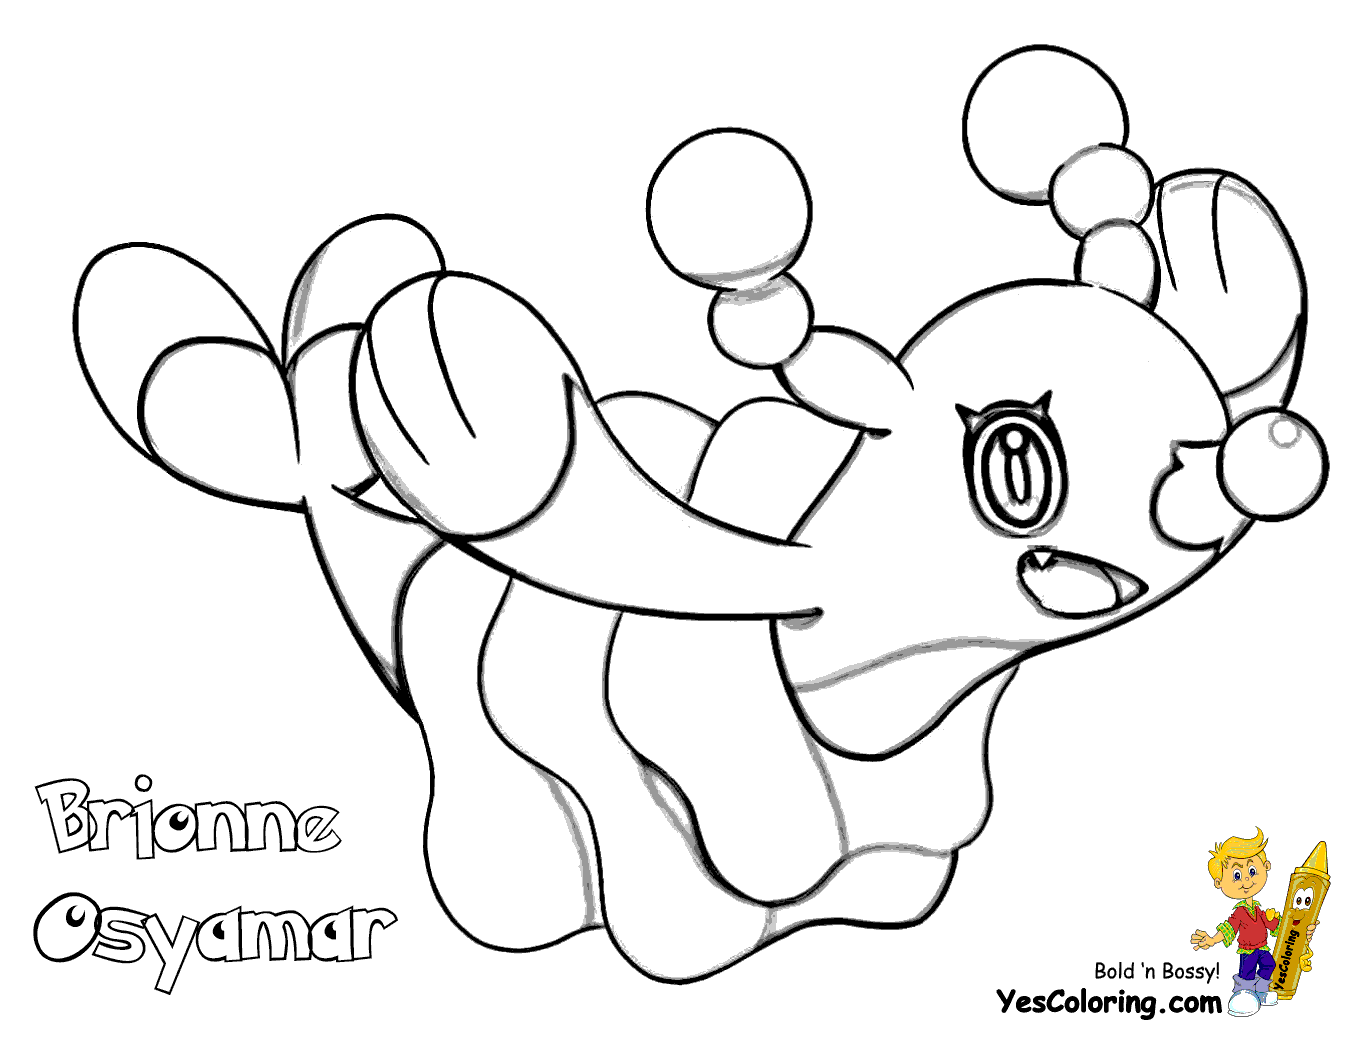 Popplio Coloring Pages.